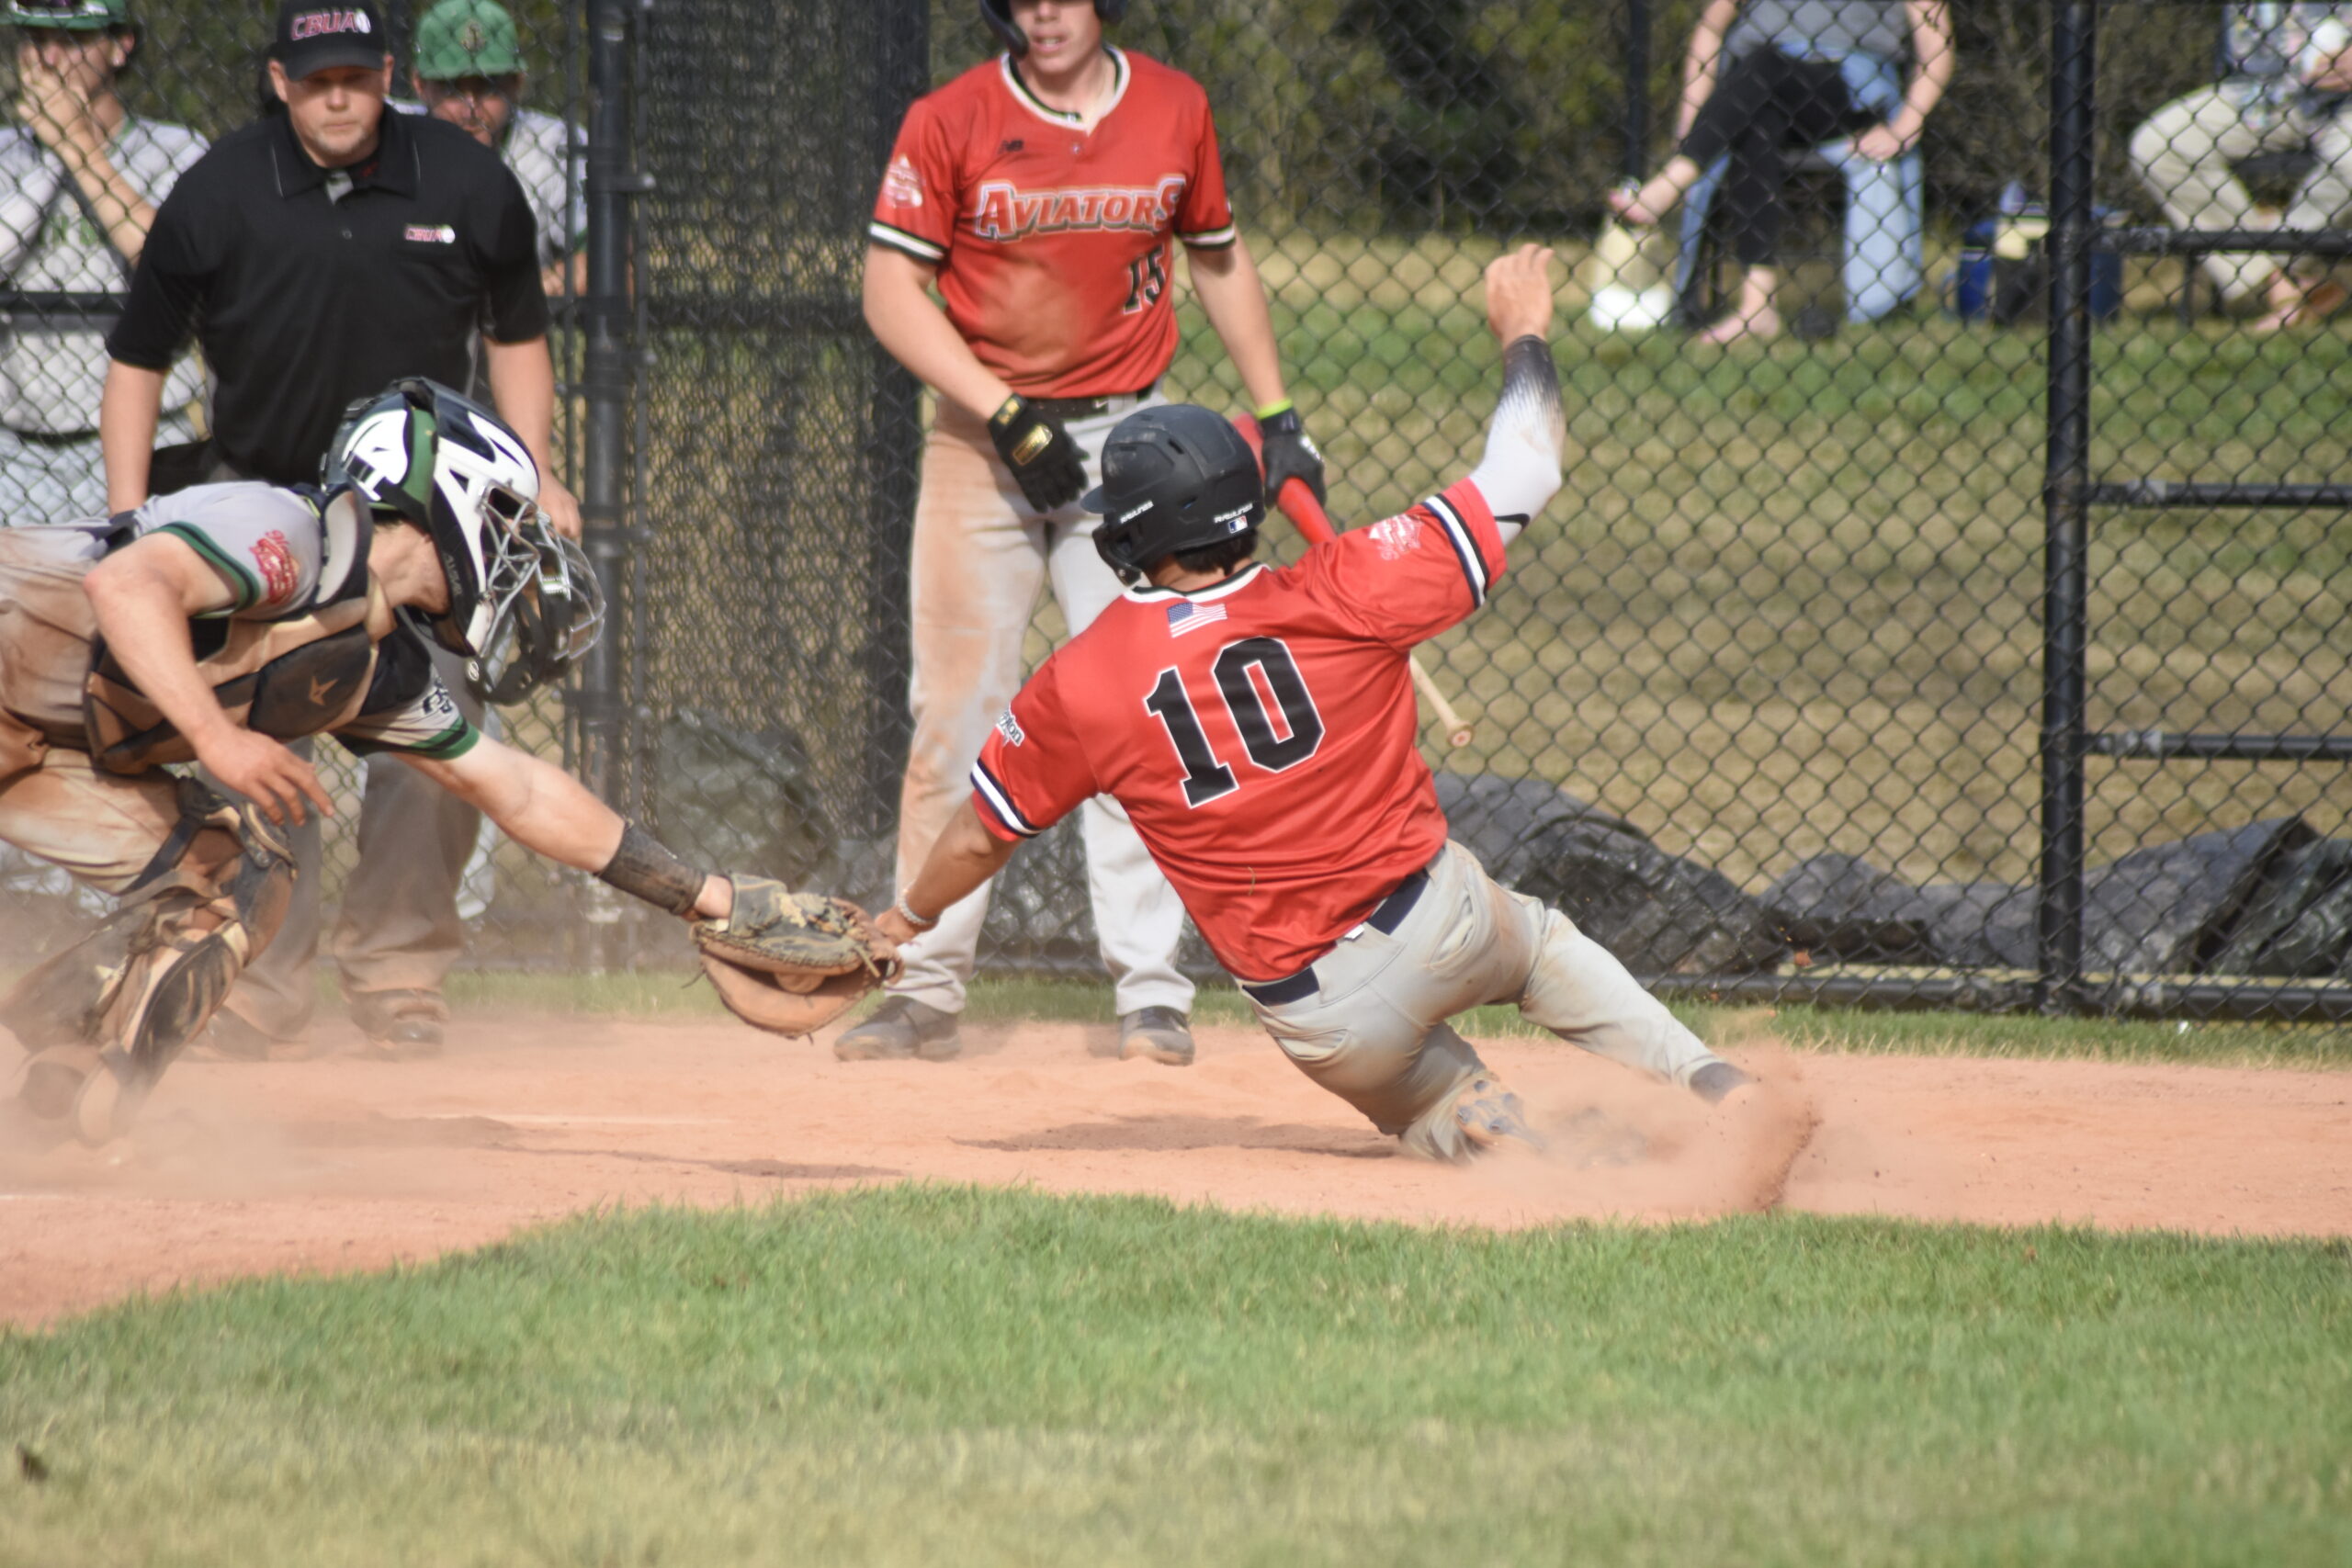 Mason Wolf (Monmouth) avoids being tagged and slides safely at home.    DREW BUDD